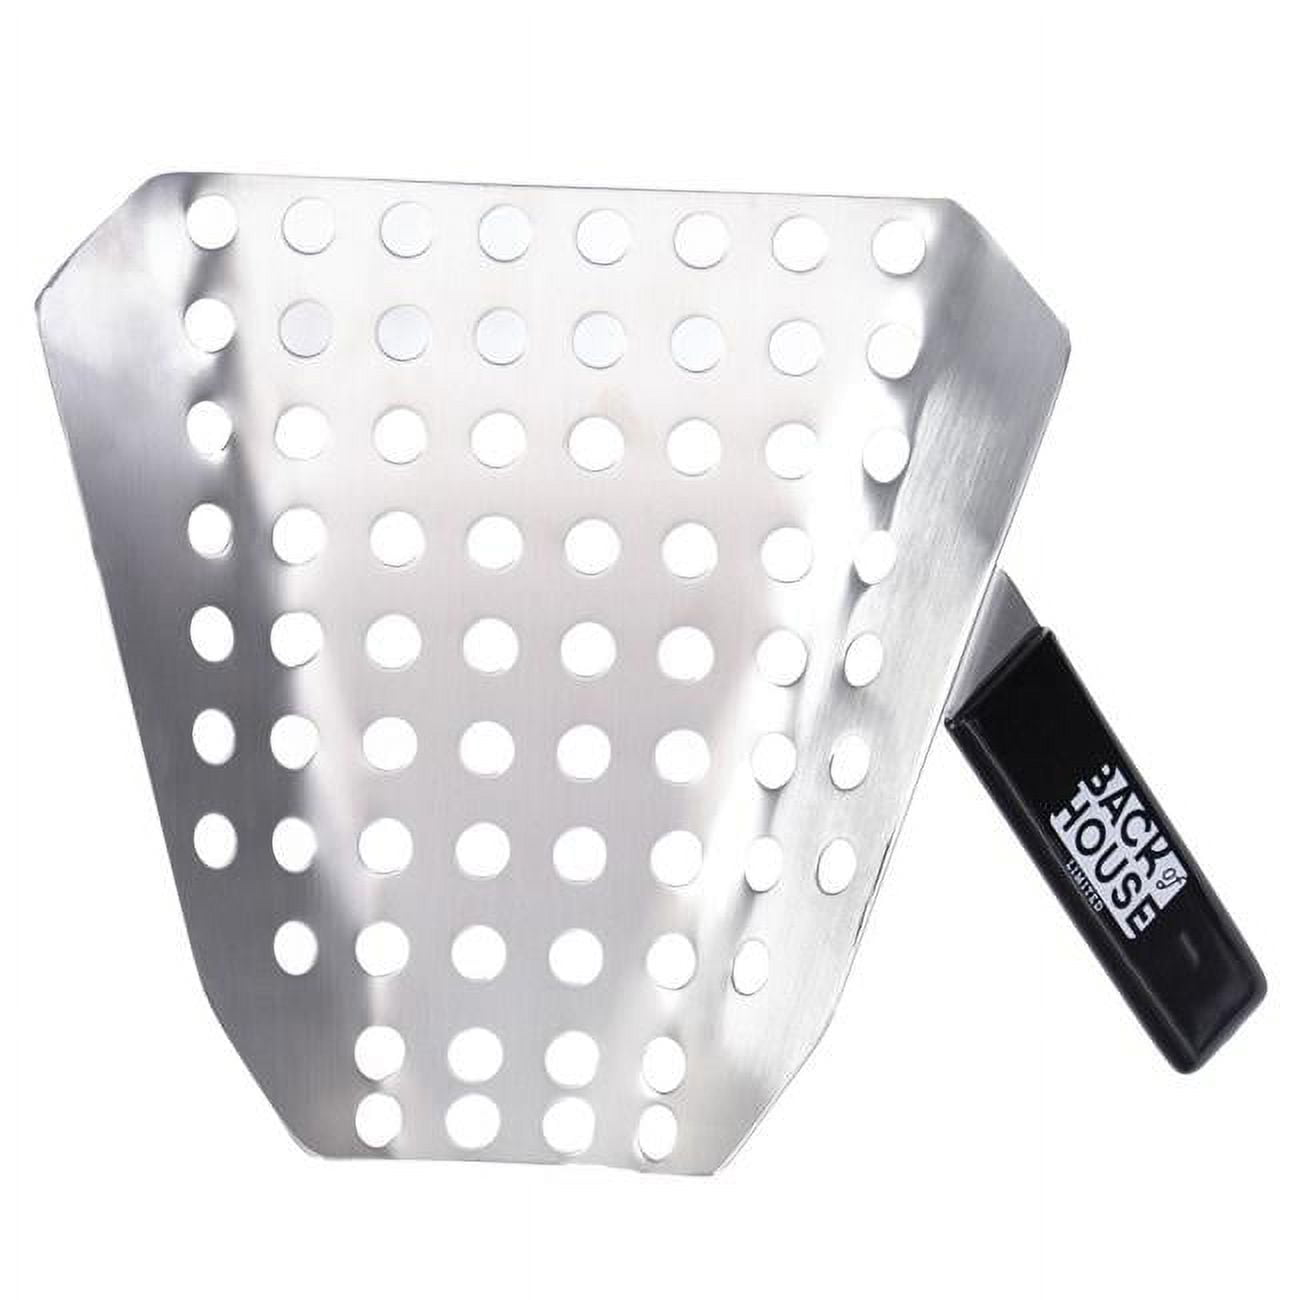 Picture of Brybelly KPOP-002 Popcorn Speed Scoop